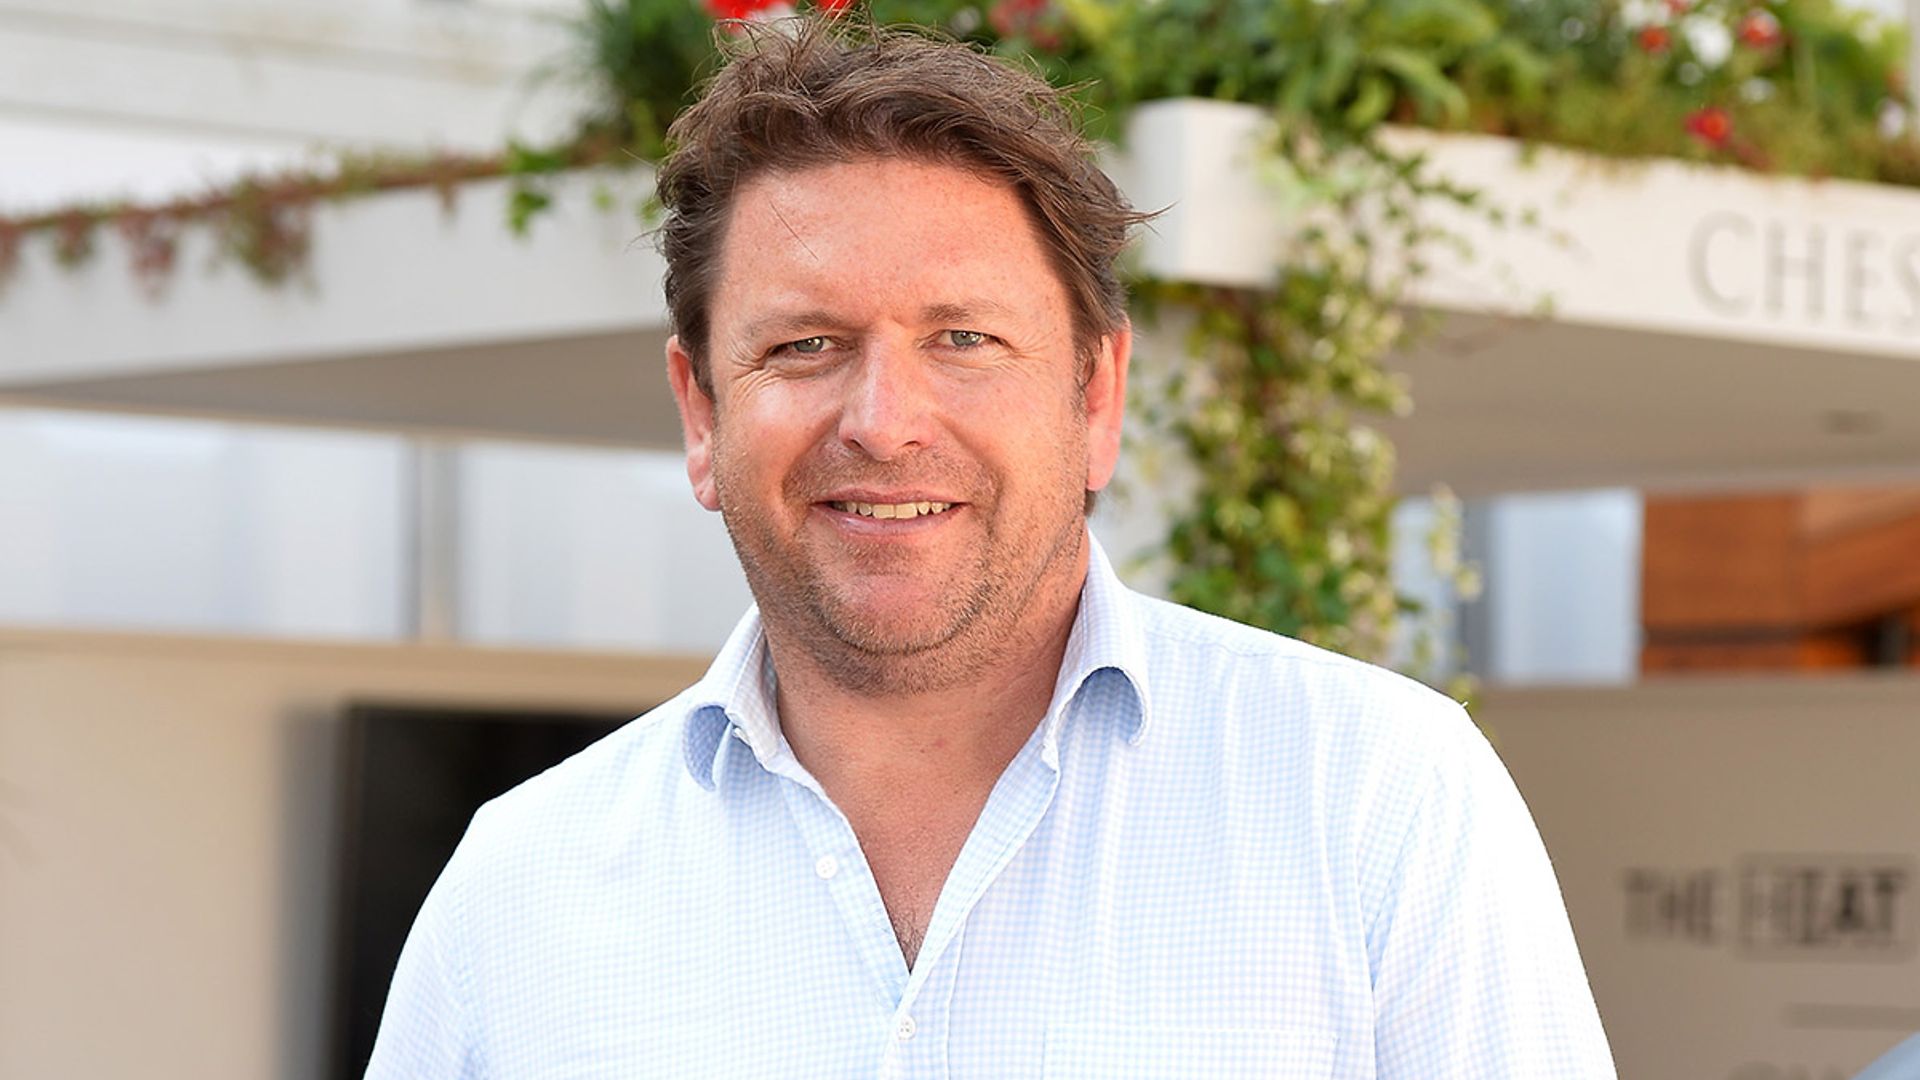 James Martin celebrates some very exciting news with fans